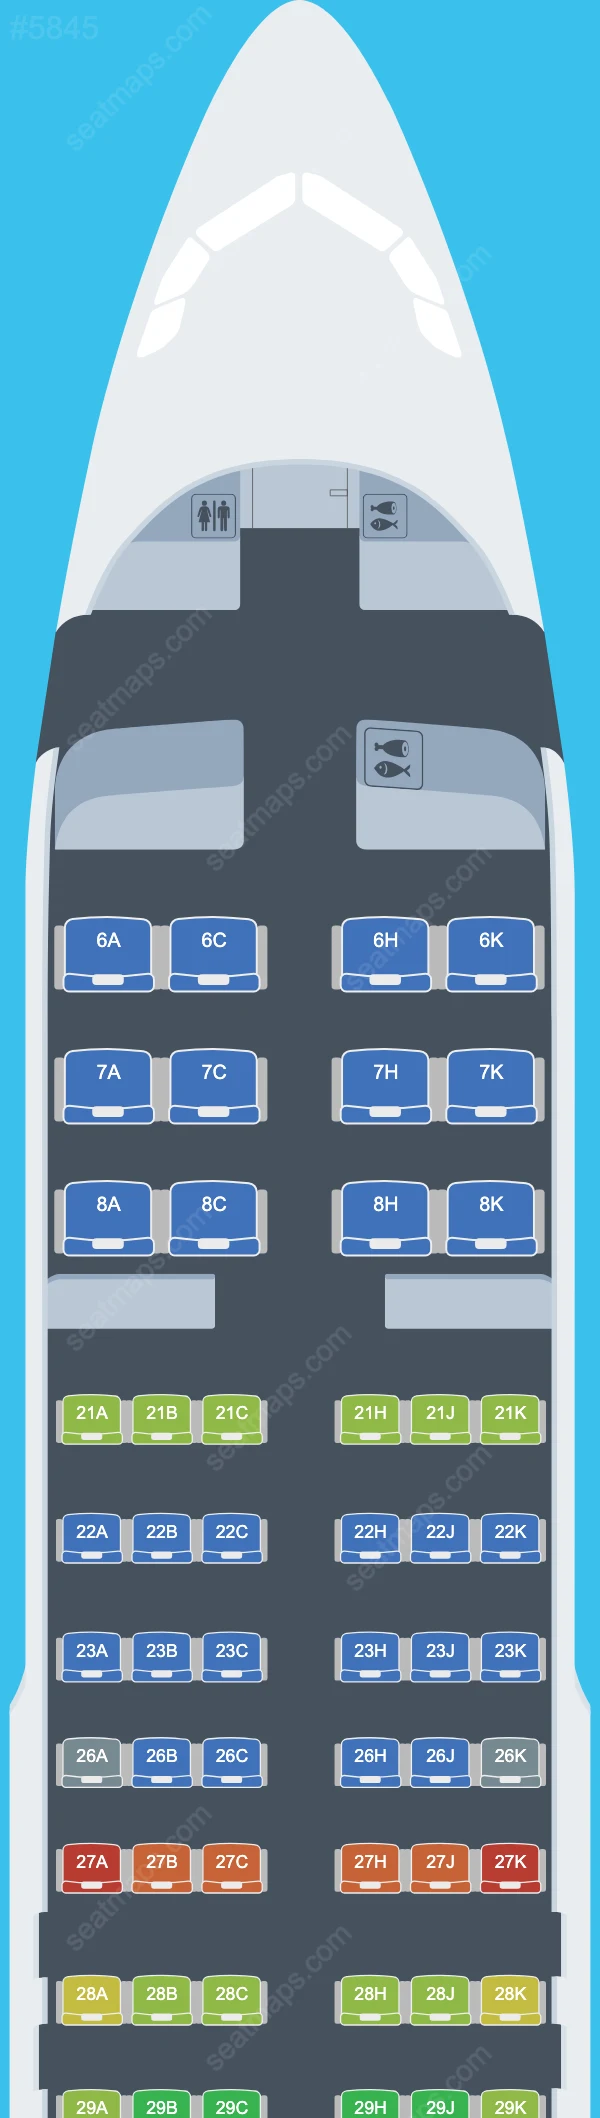 Royal Brunei Airlines Airbus A320-200neo seatmap preview